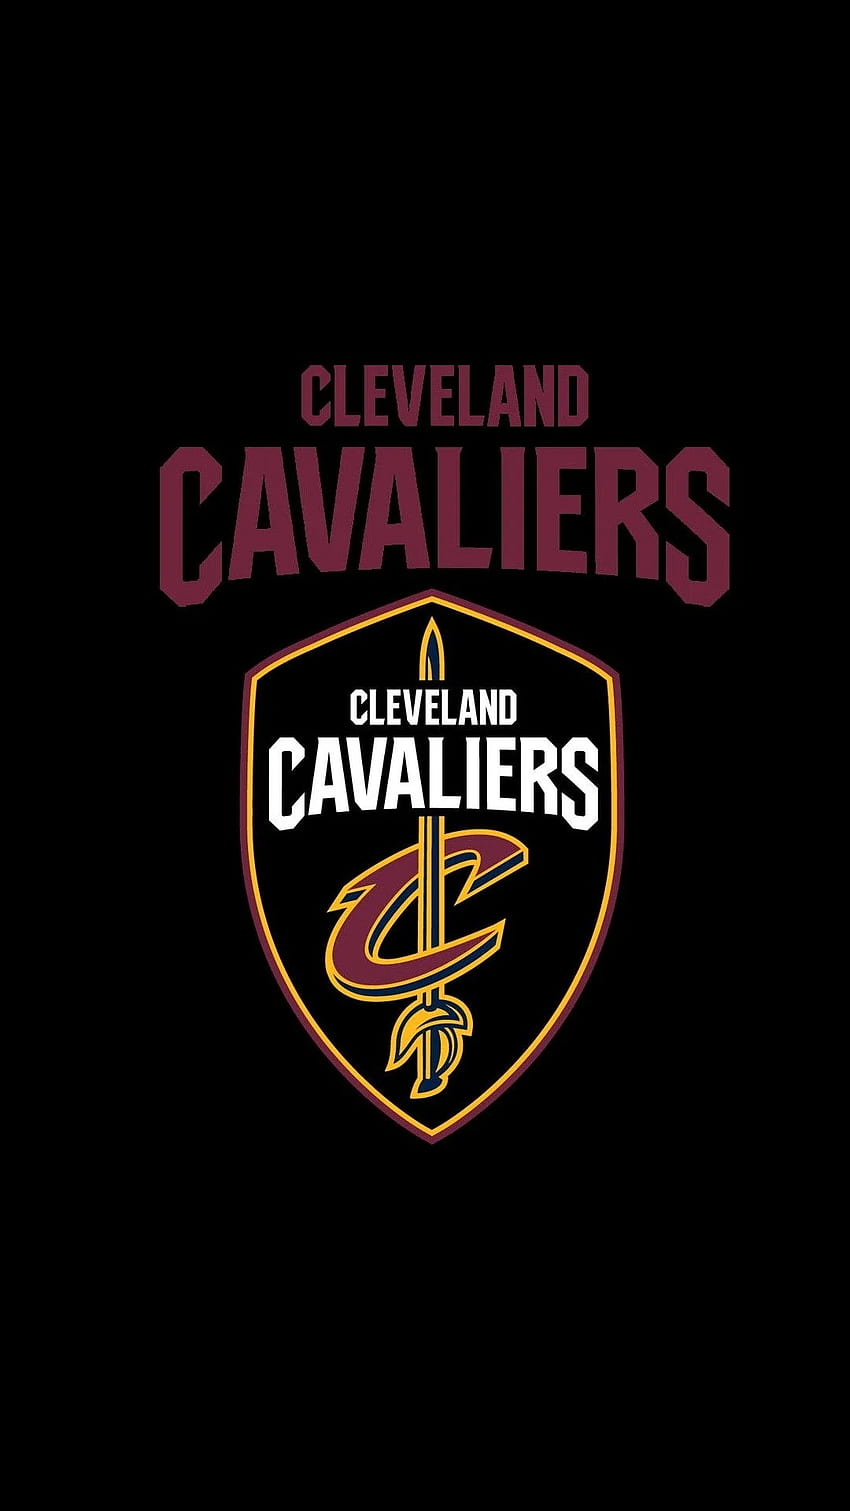 Cleveland Cavaliers NBA iPhone - Bola Basket 2018 wallpaper ponsel HD